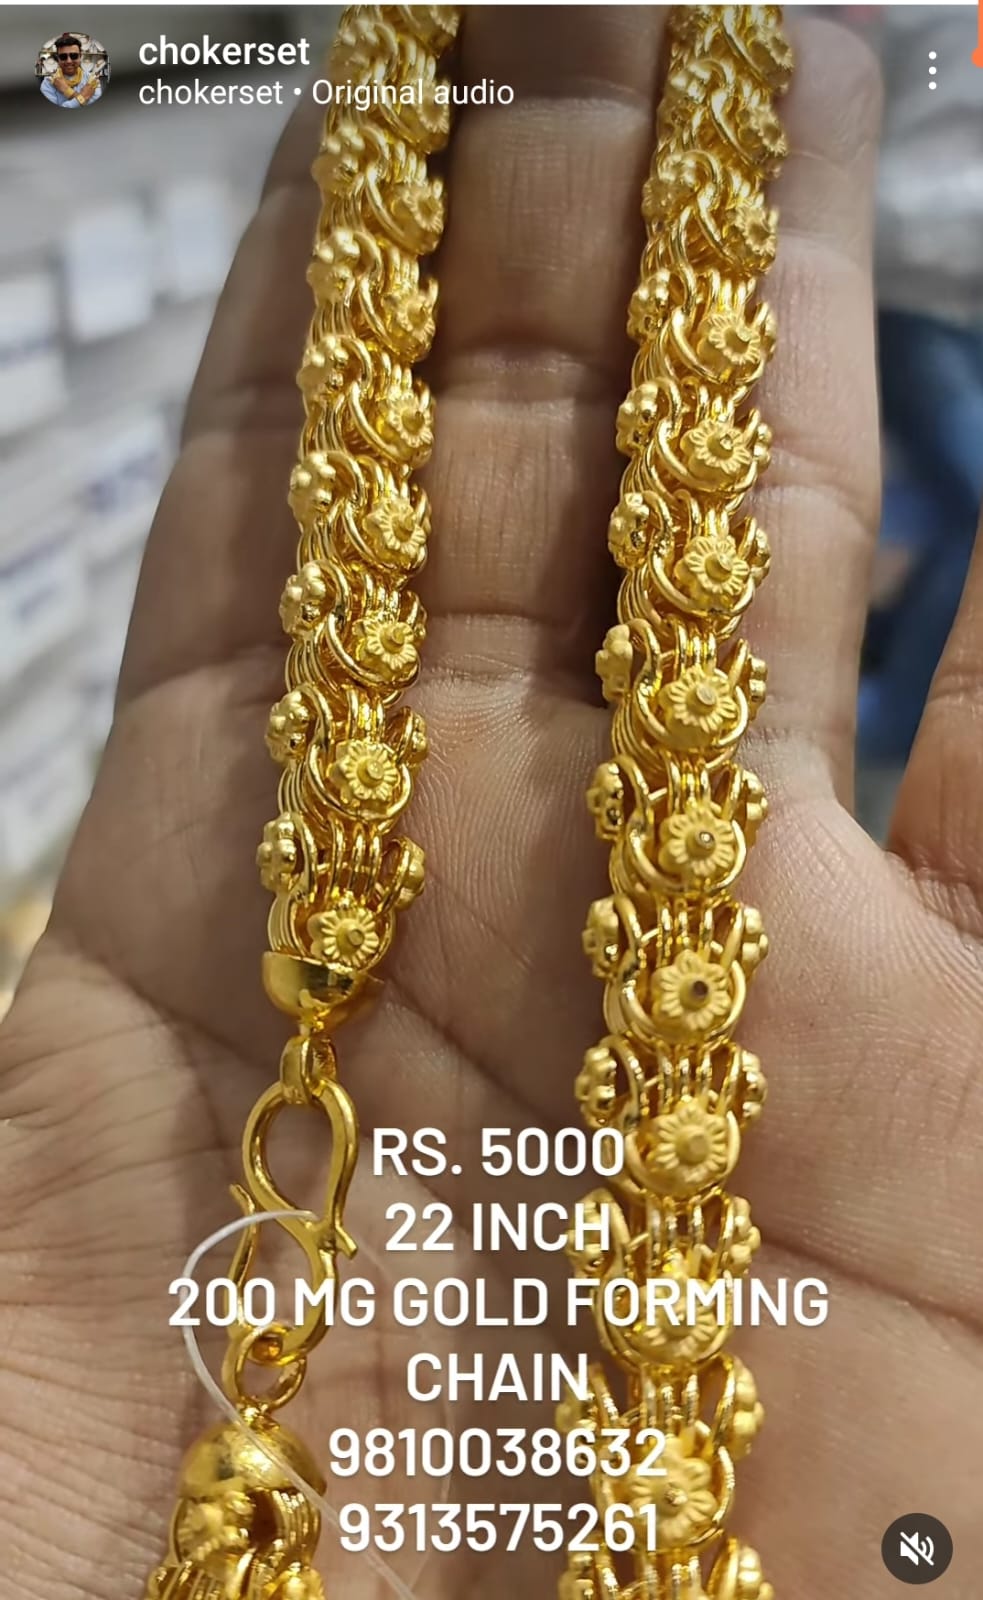 Chain 22 inch 10 mm 90 gram 200 mg Gold Forming By Chokerset (96741219)